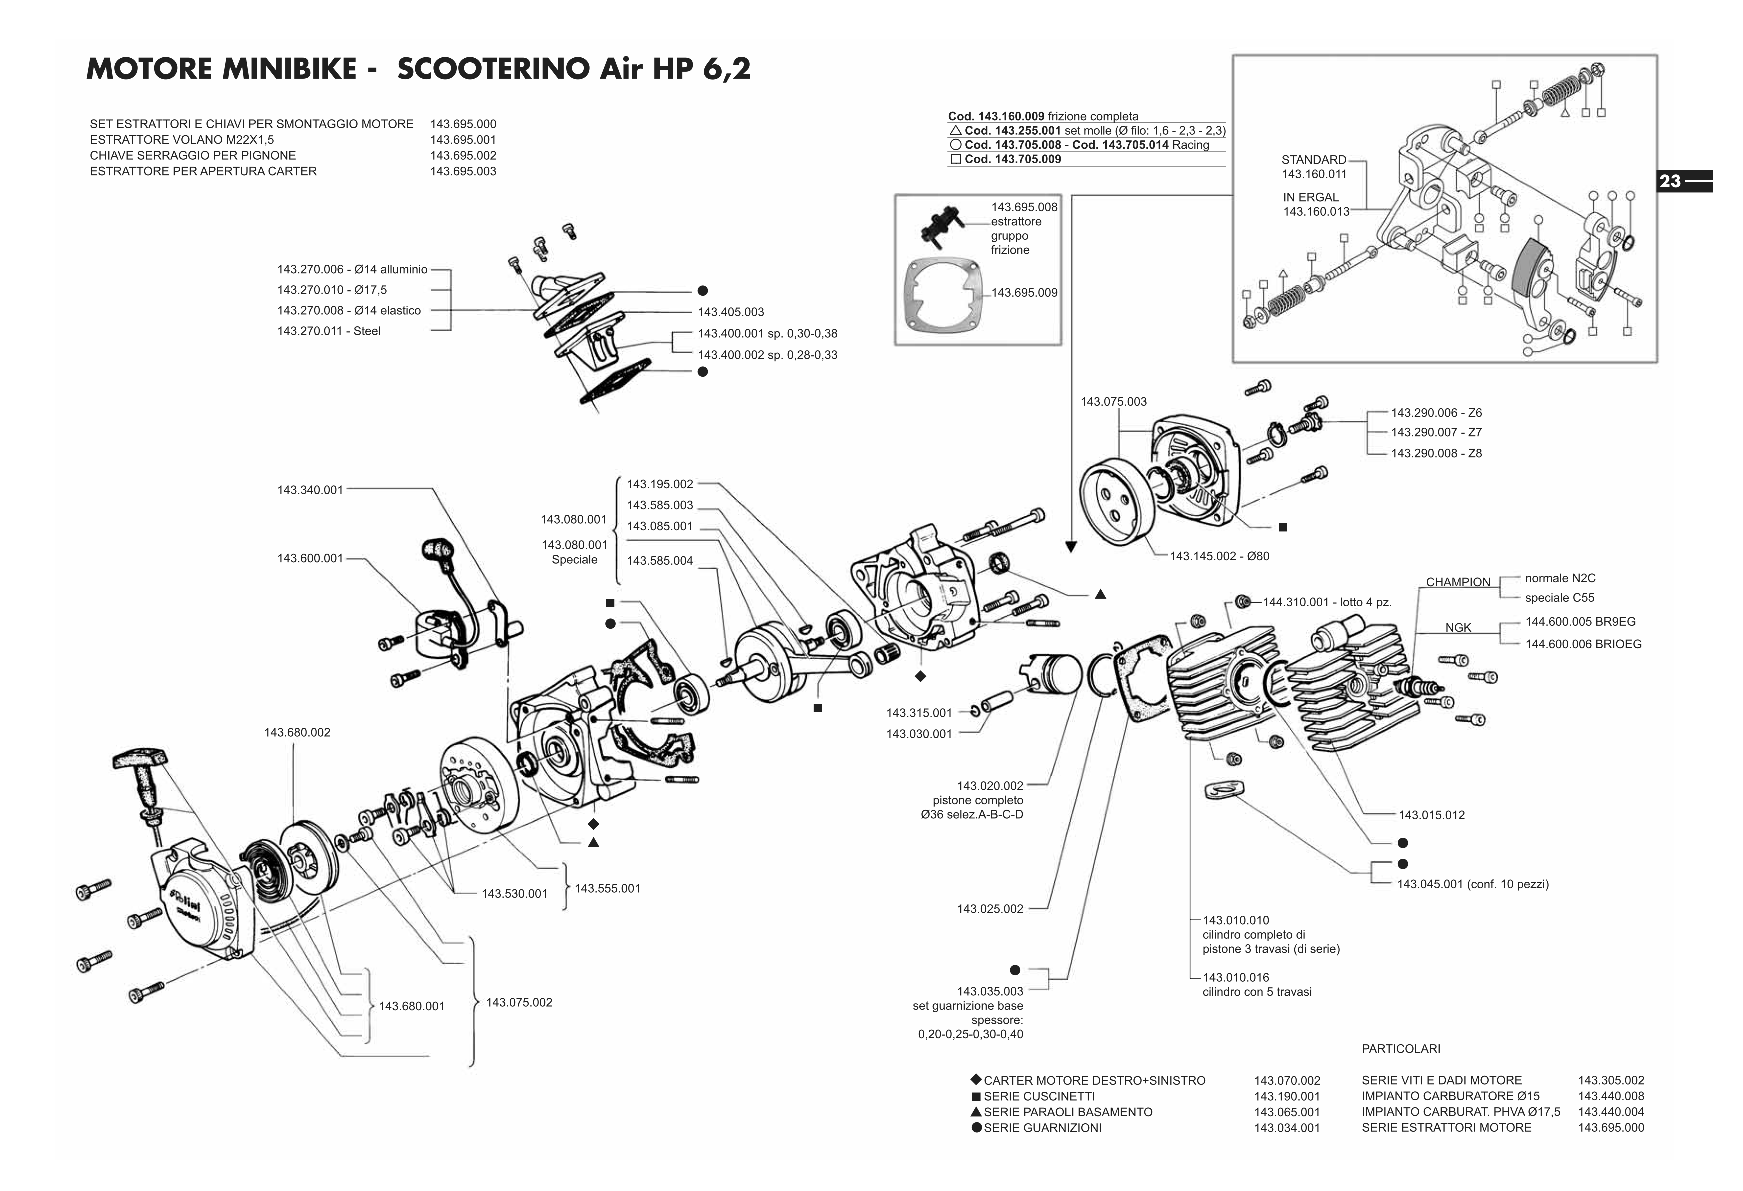 Exploded view Engine (HP 6,2)